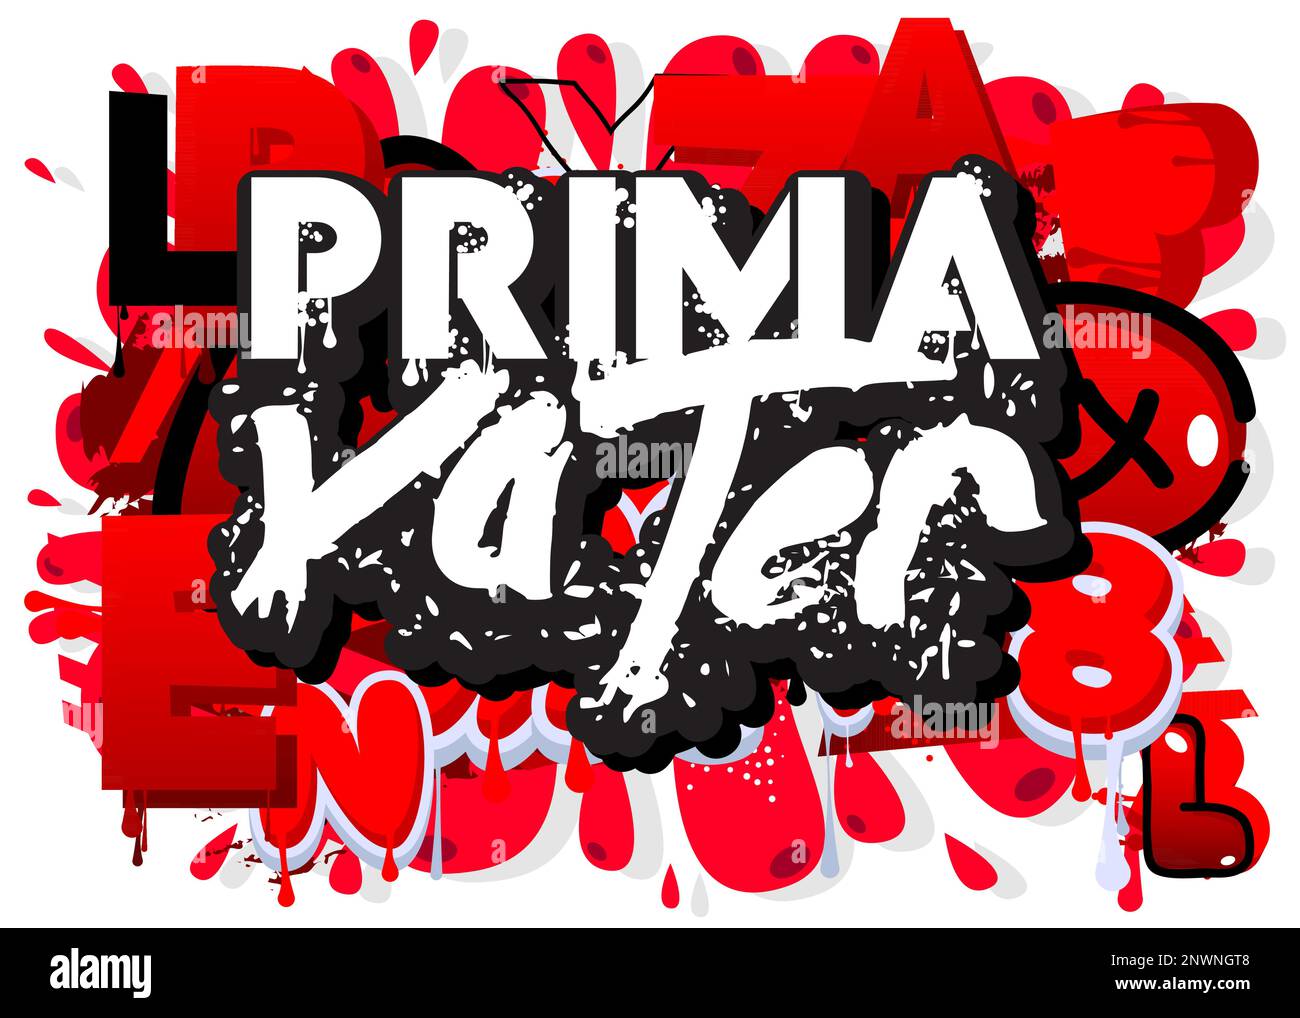 German words for Prima Vater means Awesome Father. Graffiti tag. Abstract modern street art decoration performed in urban painting style. Stock Vector